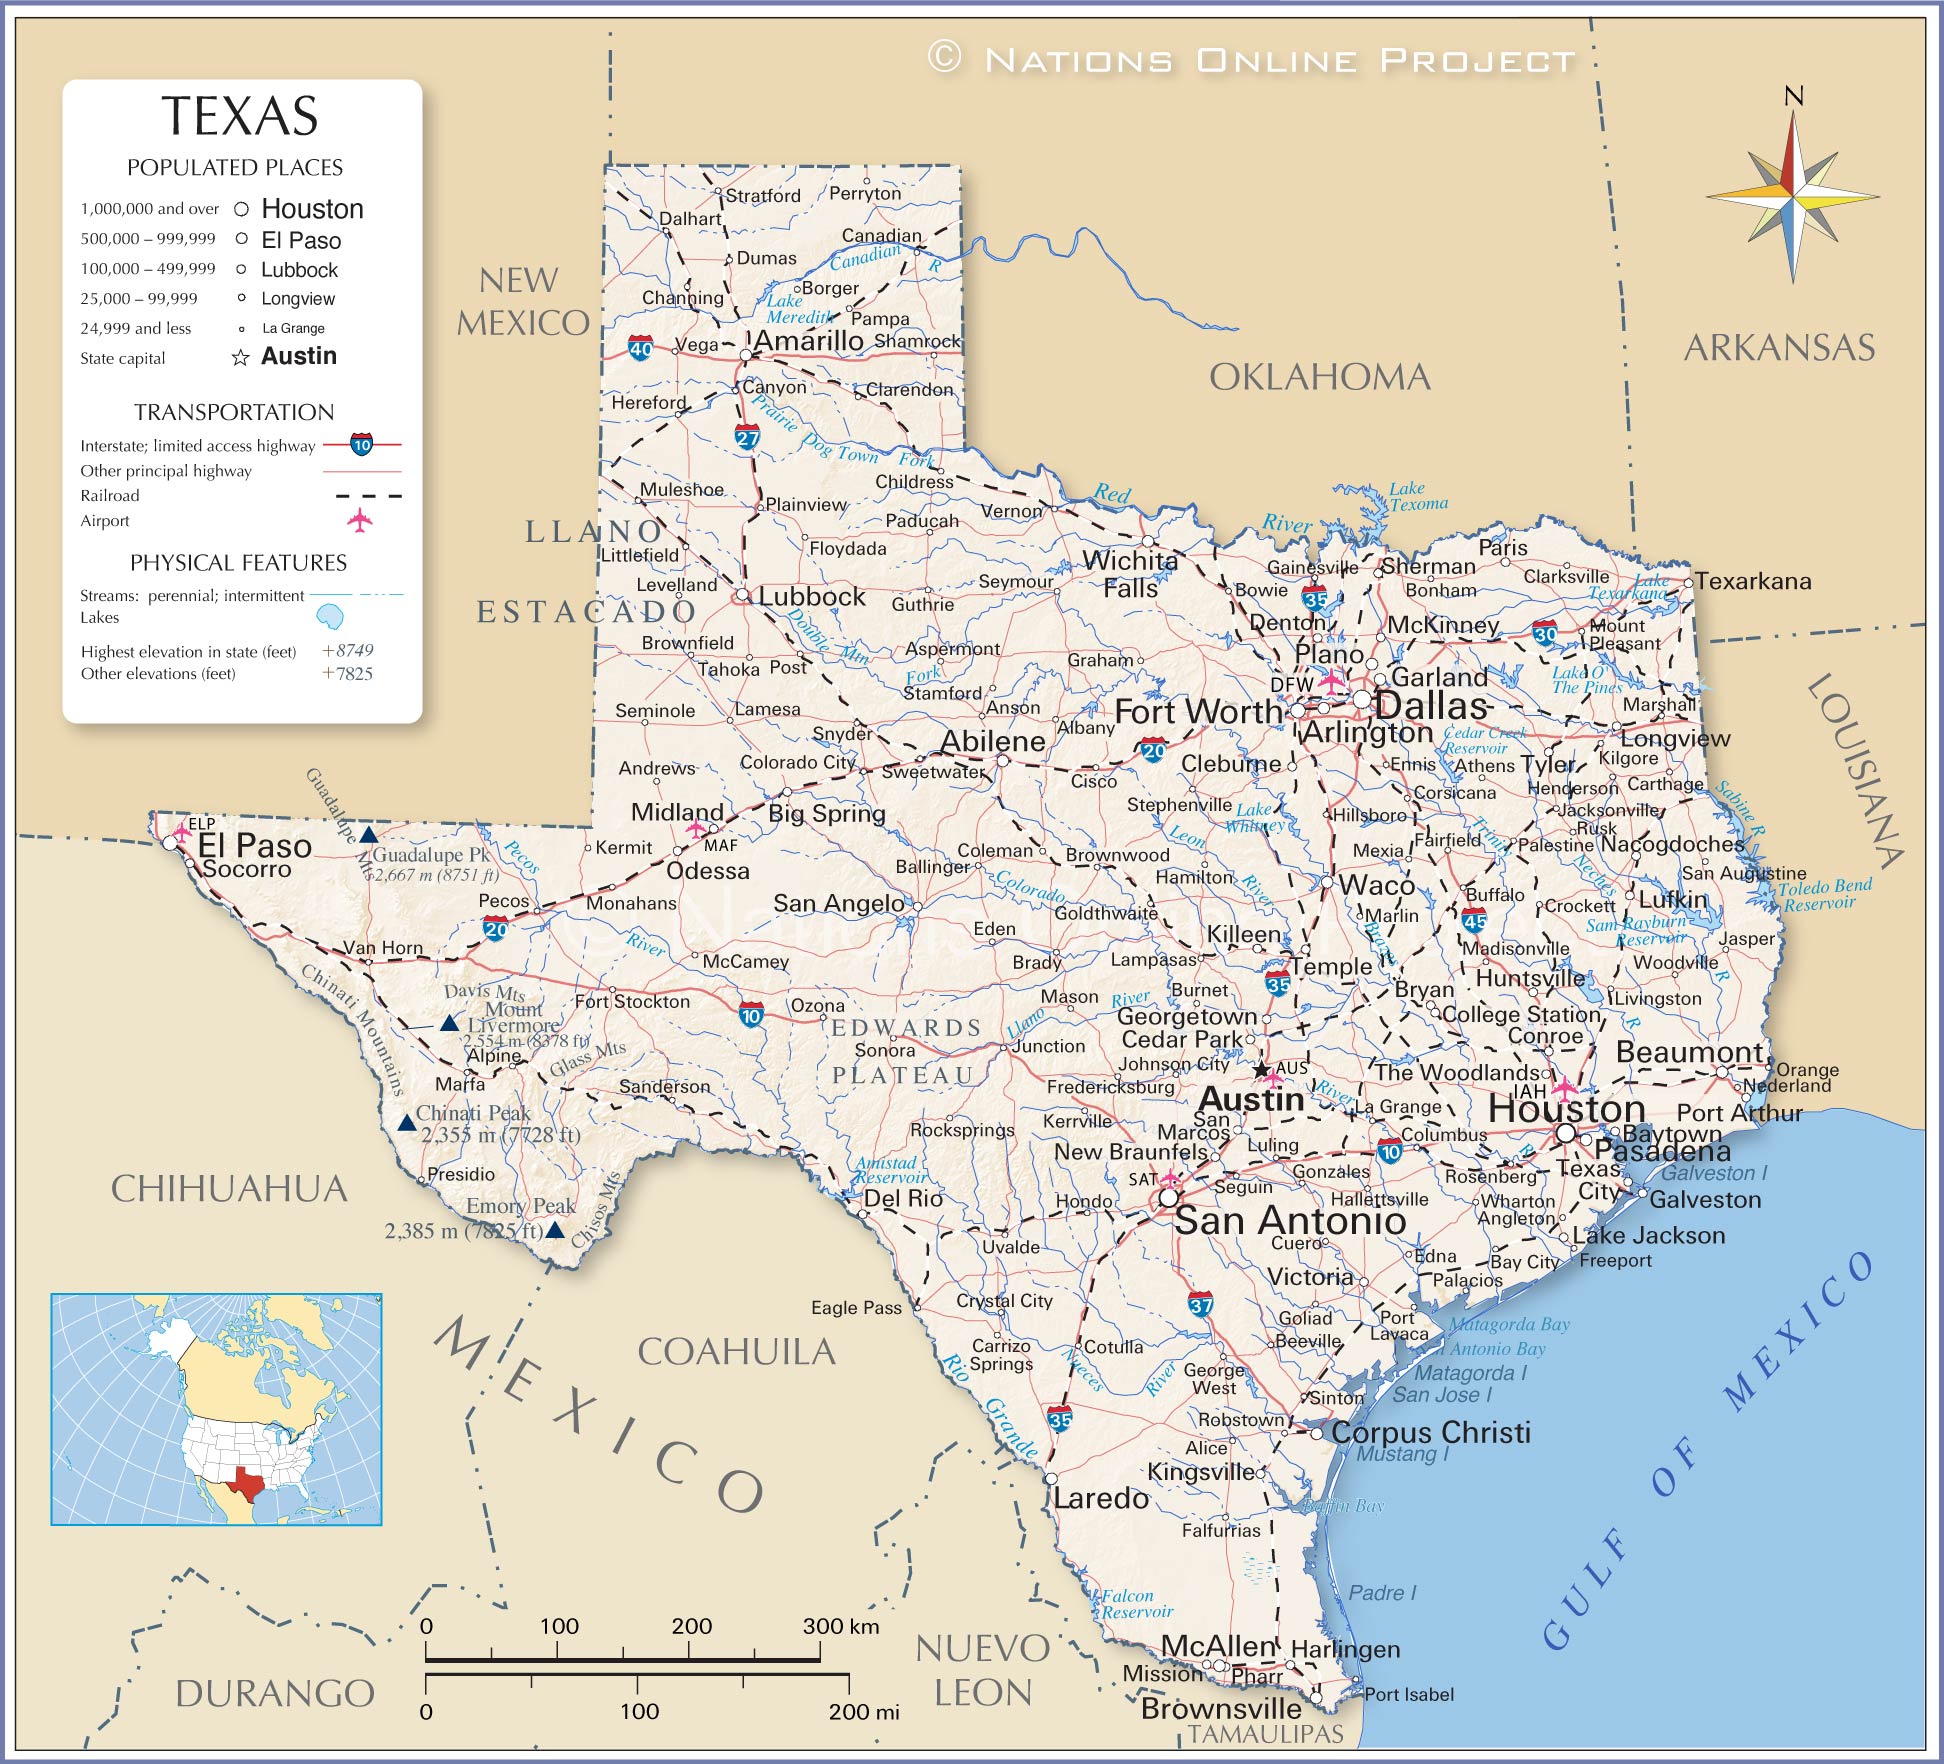 Reference Maps of Texas, USA - Nations Online Project